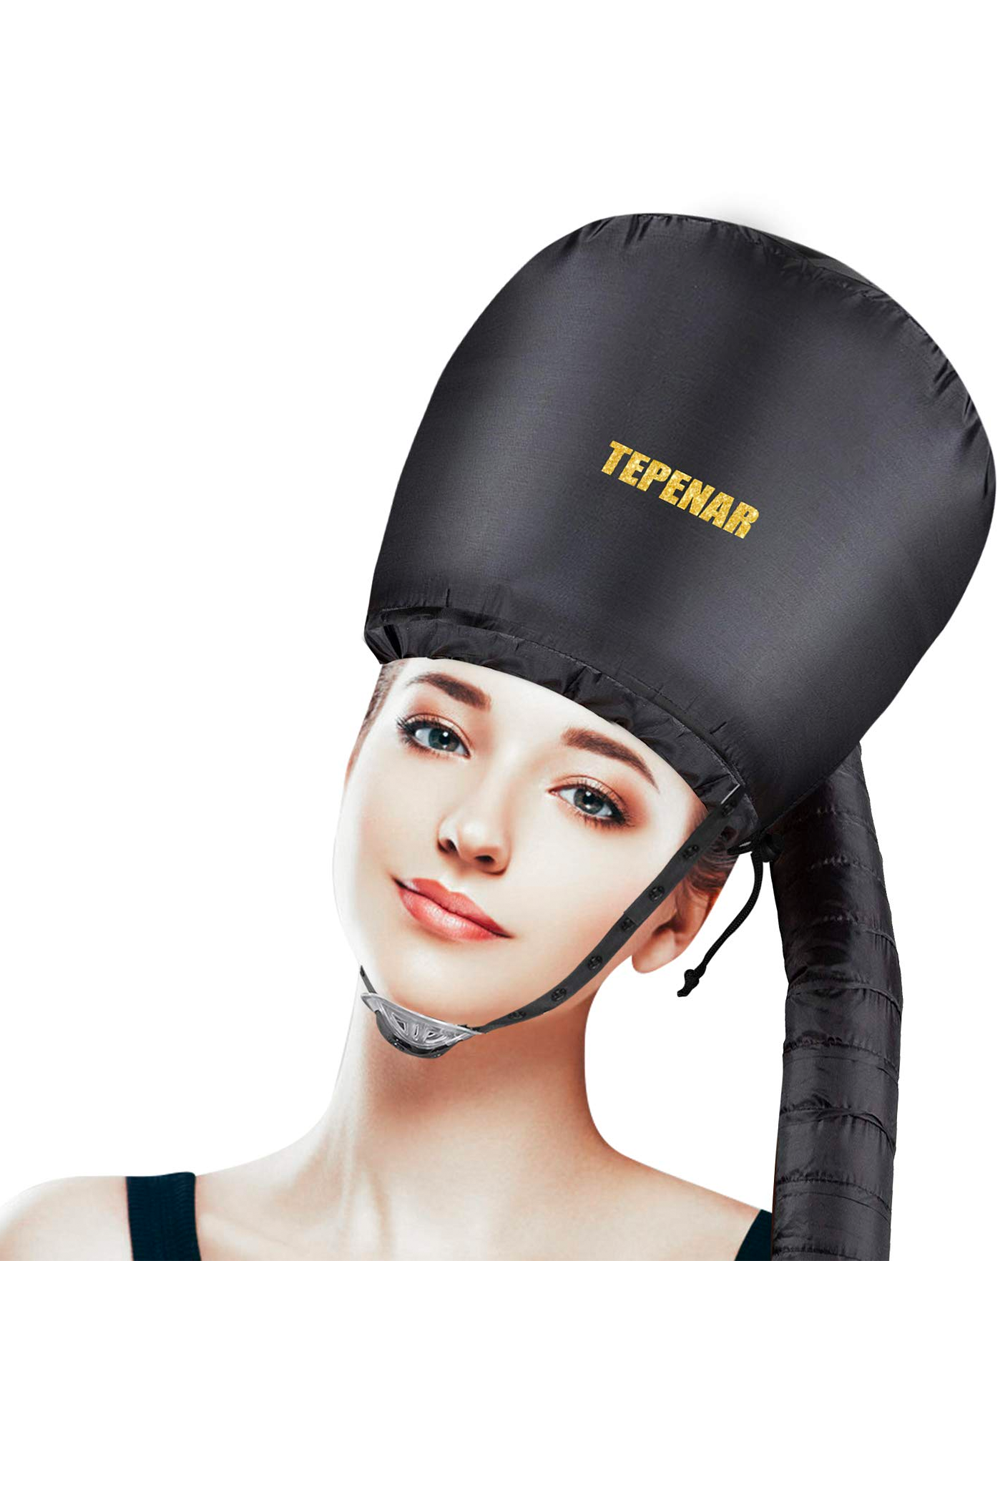 7 Best Bonnet Hair Dryers of 2022 for Heat Styling and Conditioning